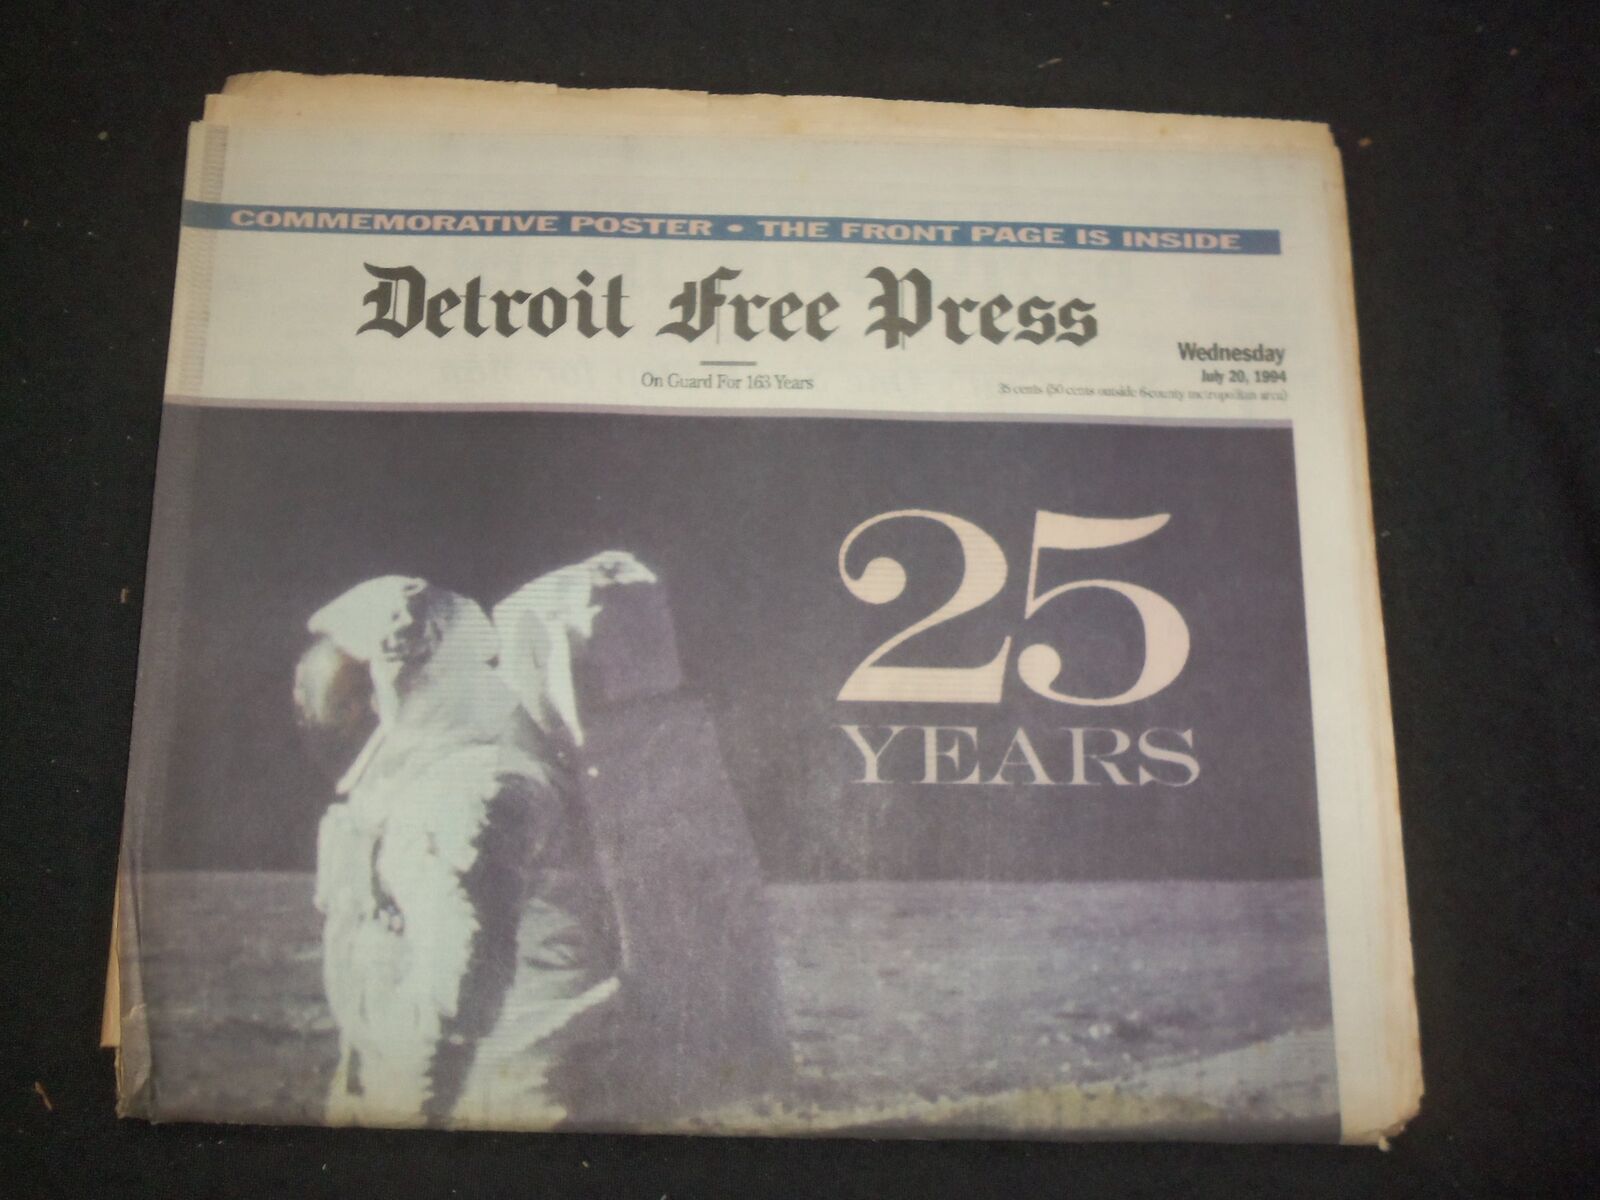 1994 JULY 20 DETROIT FREE PRESS NEWSPAPER - 25 YEARS AFTER MOON LANDING- NP 7705